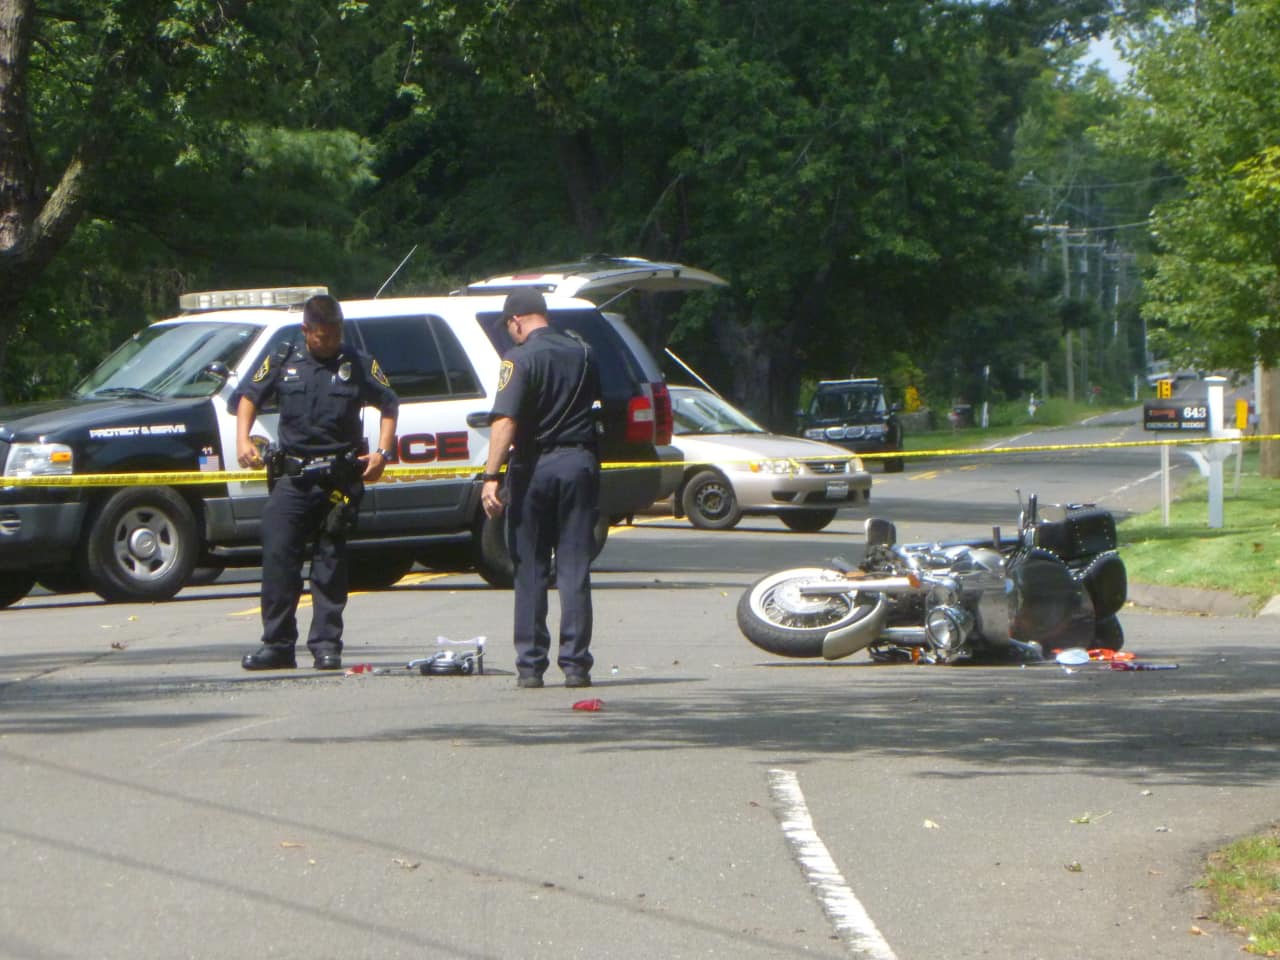 New Canaan Police are investigating an accident involving Ofc. Aaron LaTourette who was driving his motorcycle on Oenoke Ridge Road. 